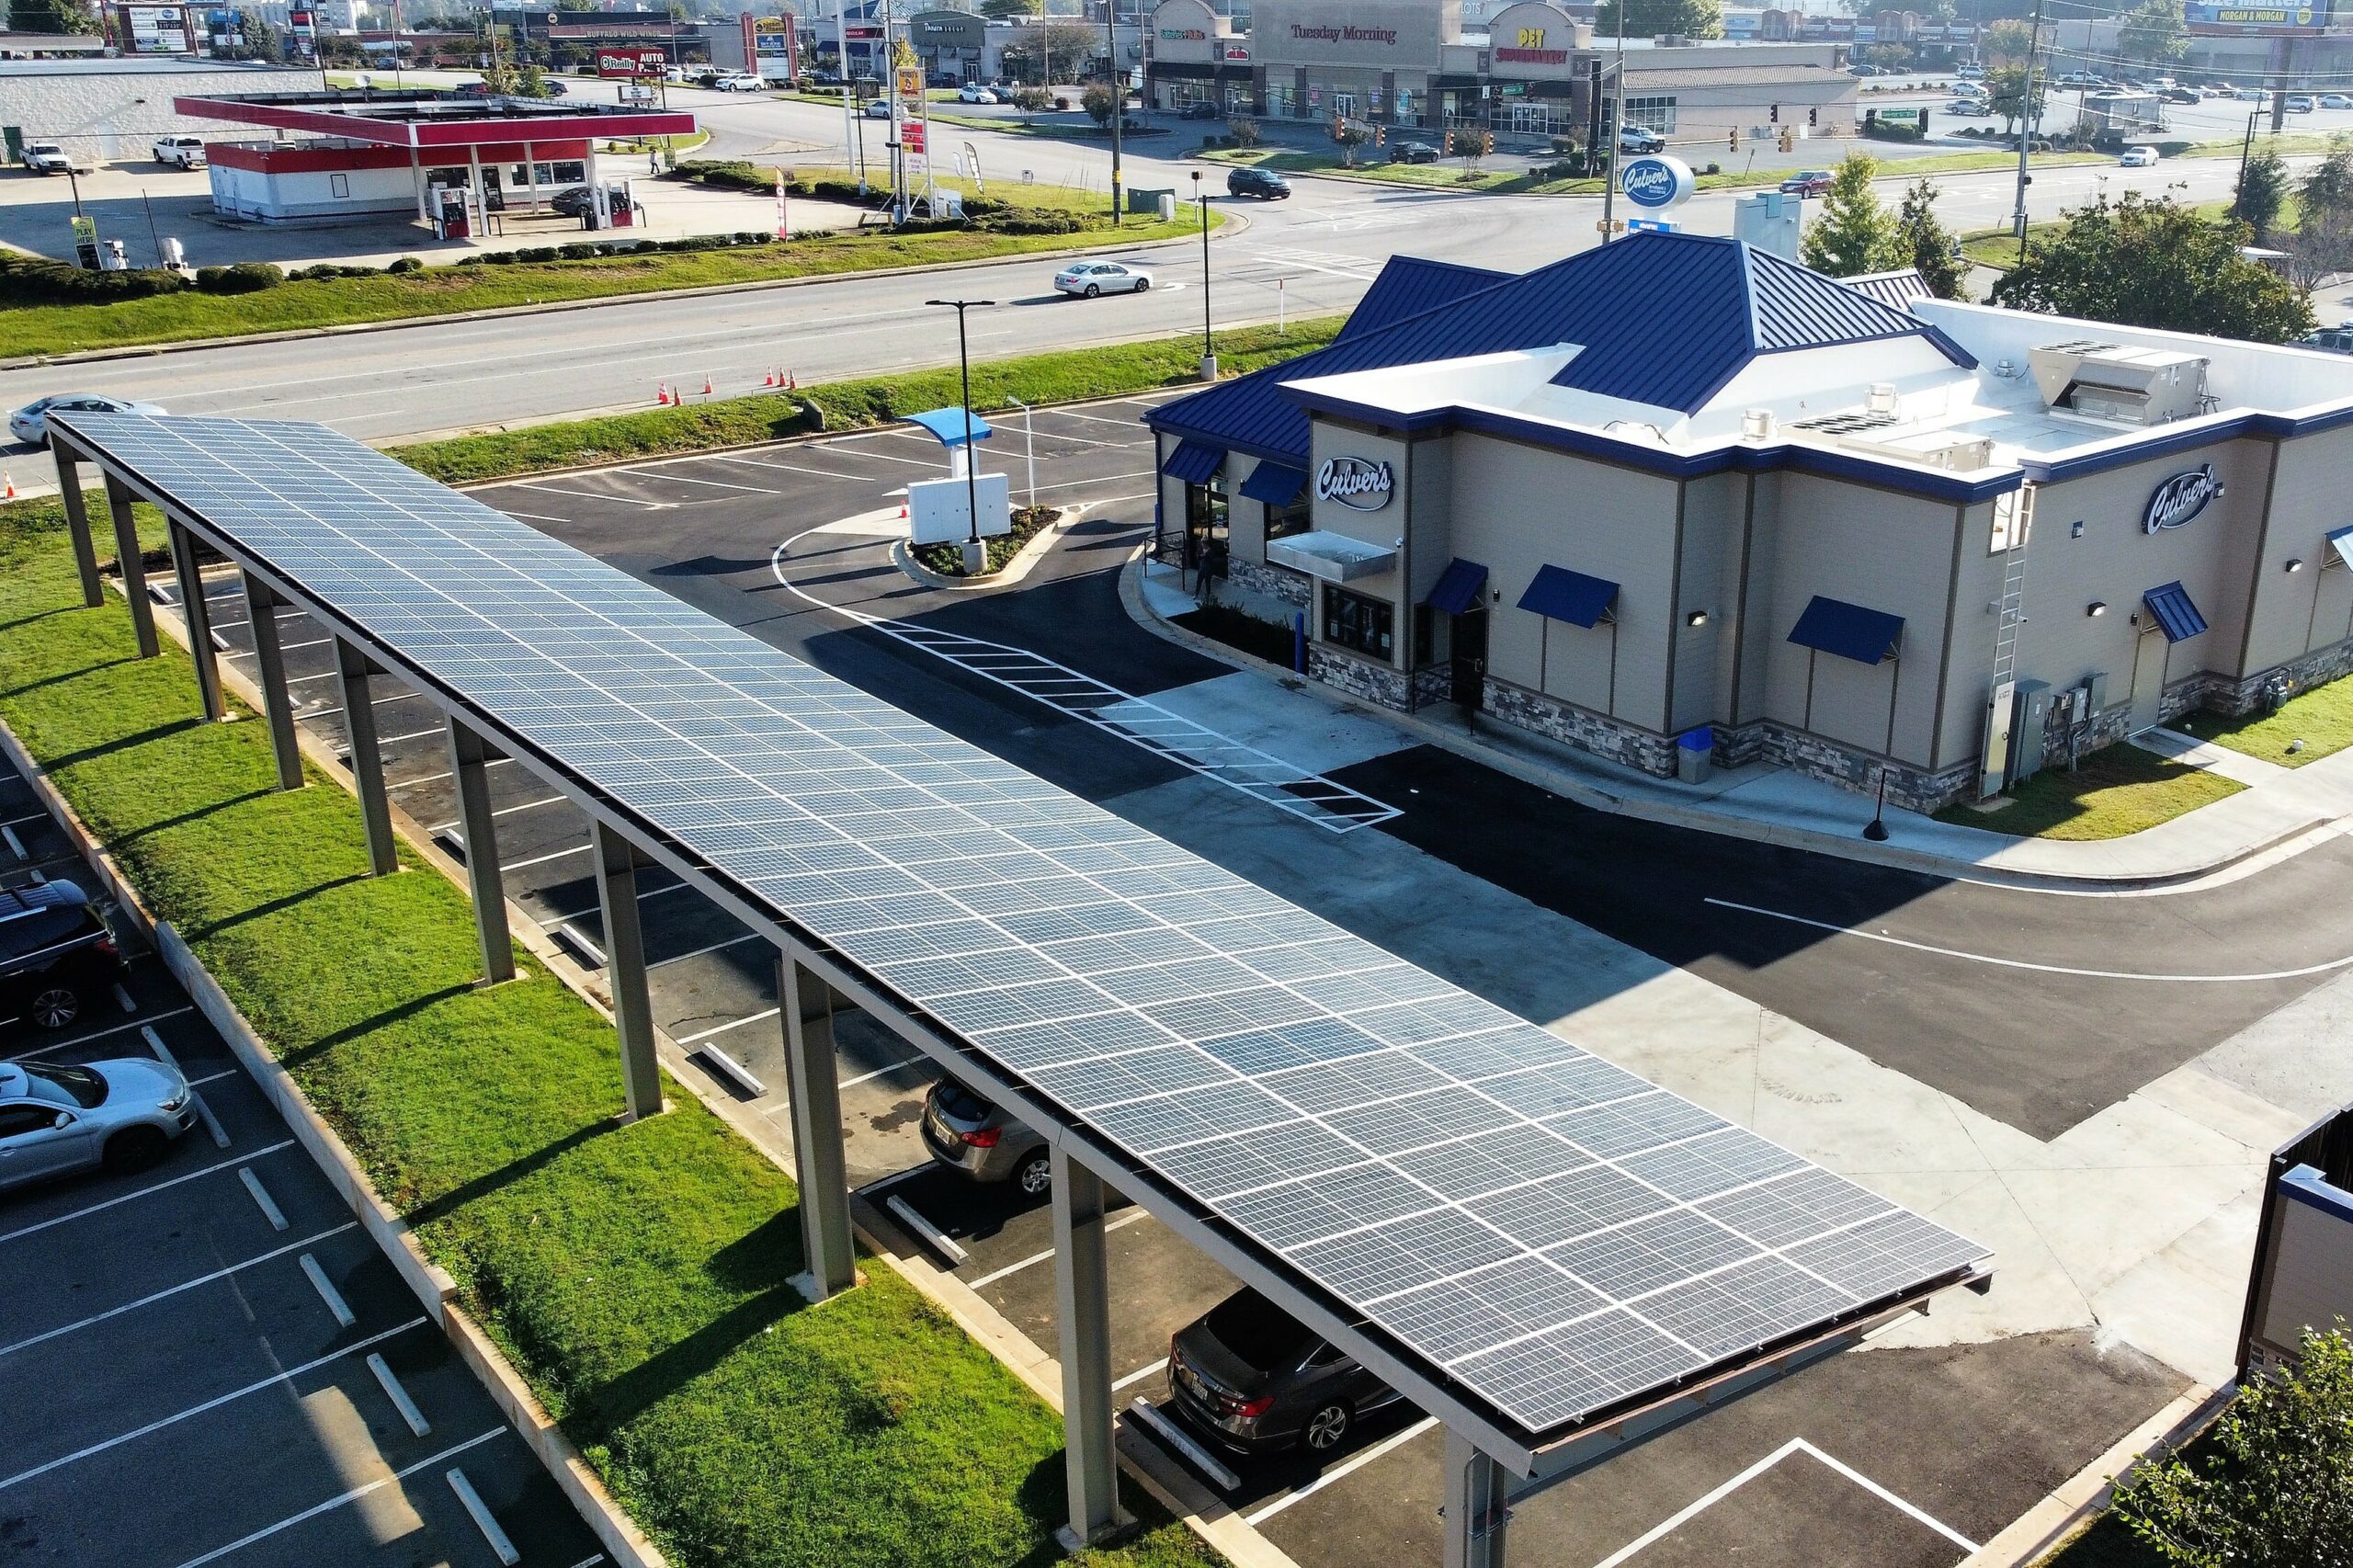 Beautiful array of solar panel canopy over parking lot